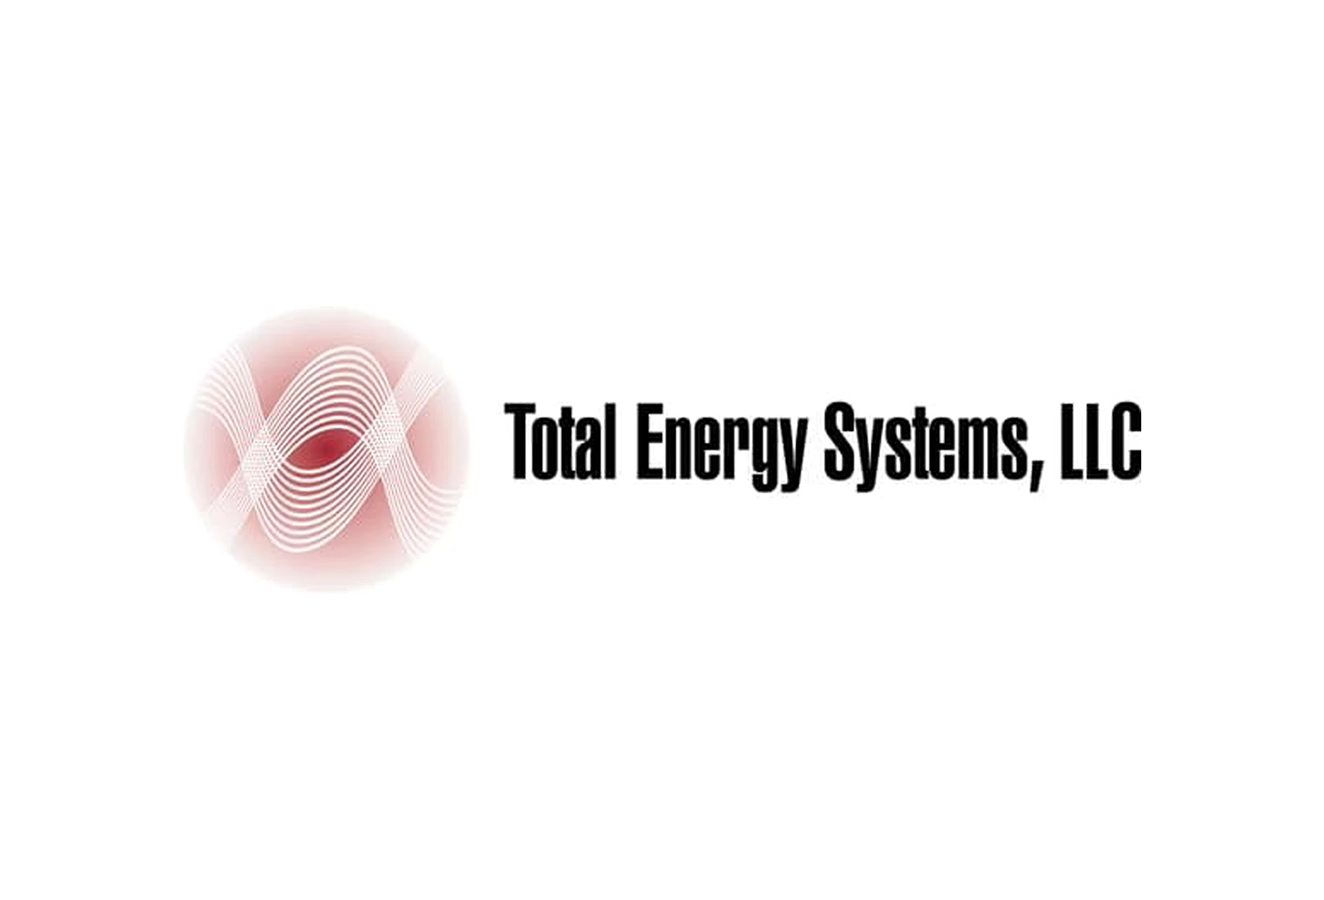 Total Energy Systems